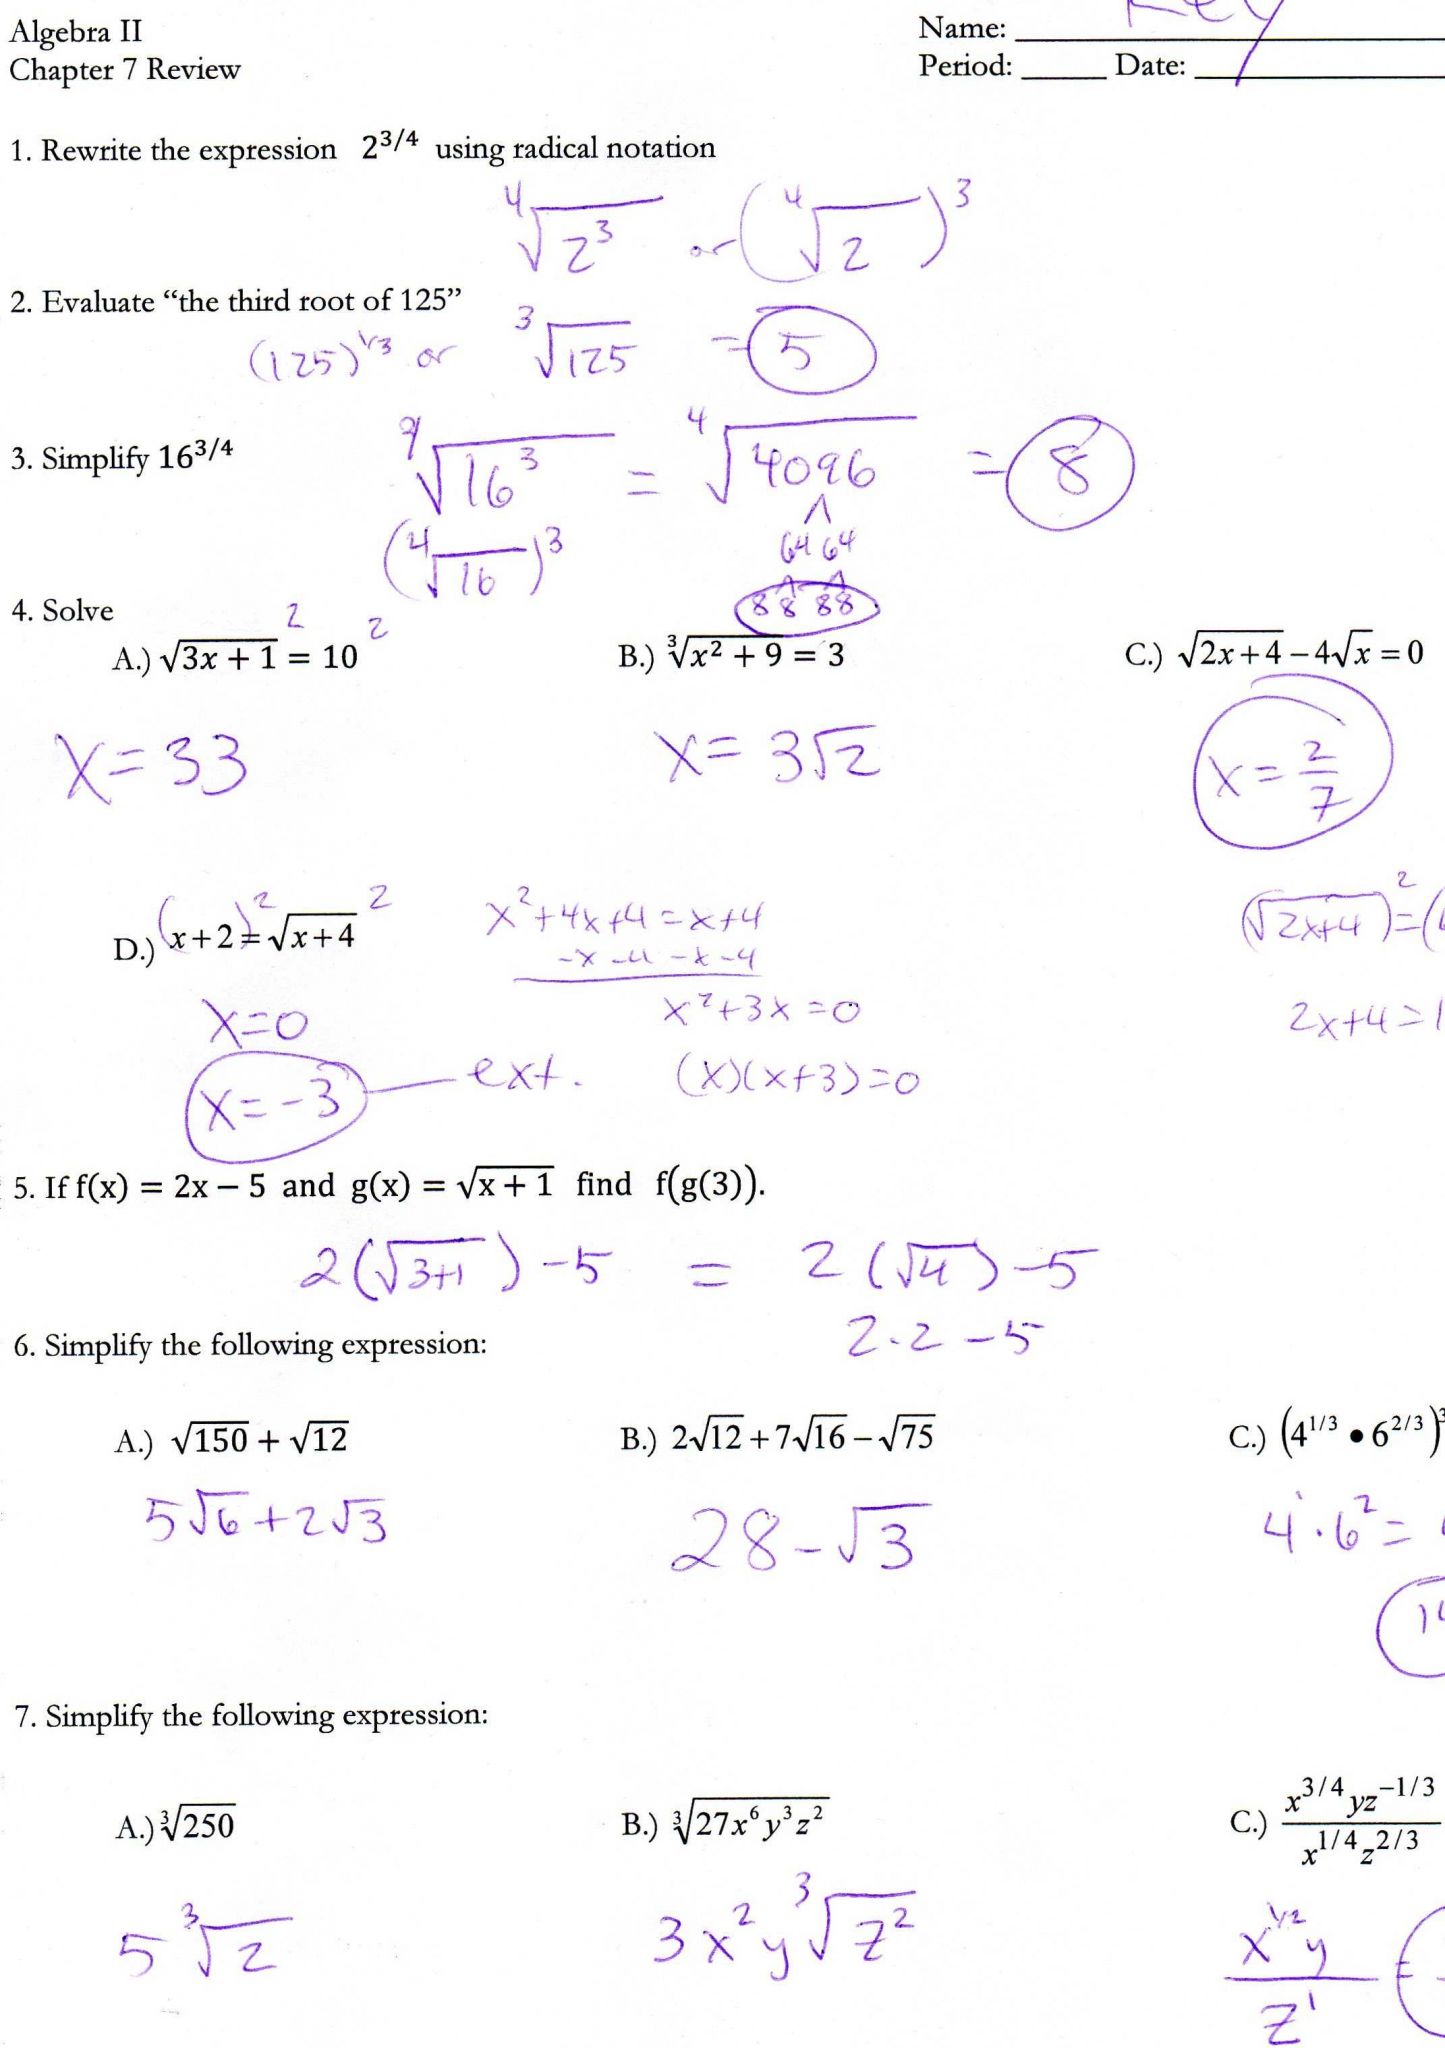 Radicals and Rational Exponents Worksheet Answers as Well as Algebra 2 Chapter 5 Quadratic Equations and Functions Answers